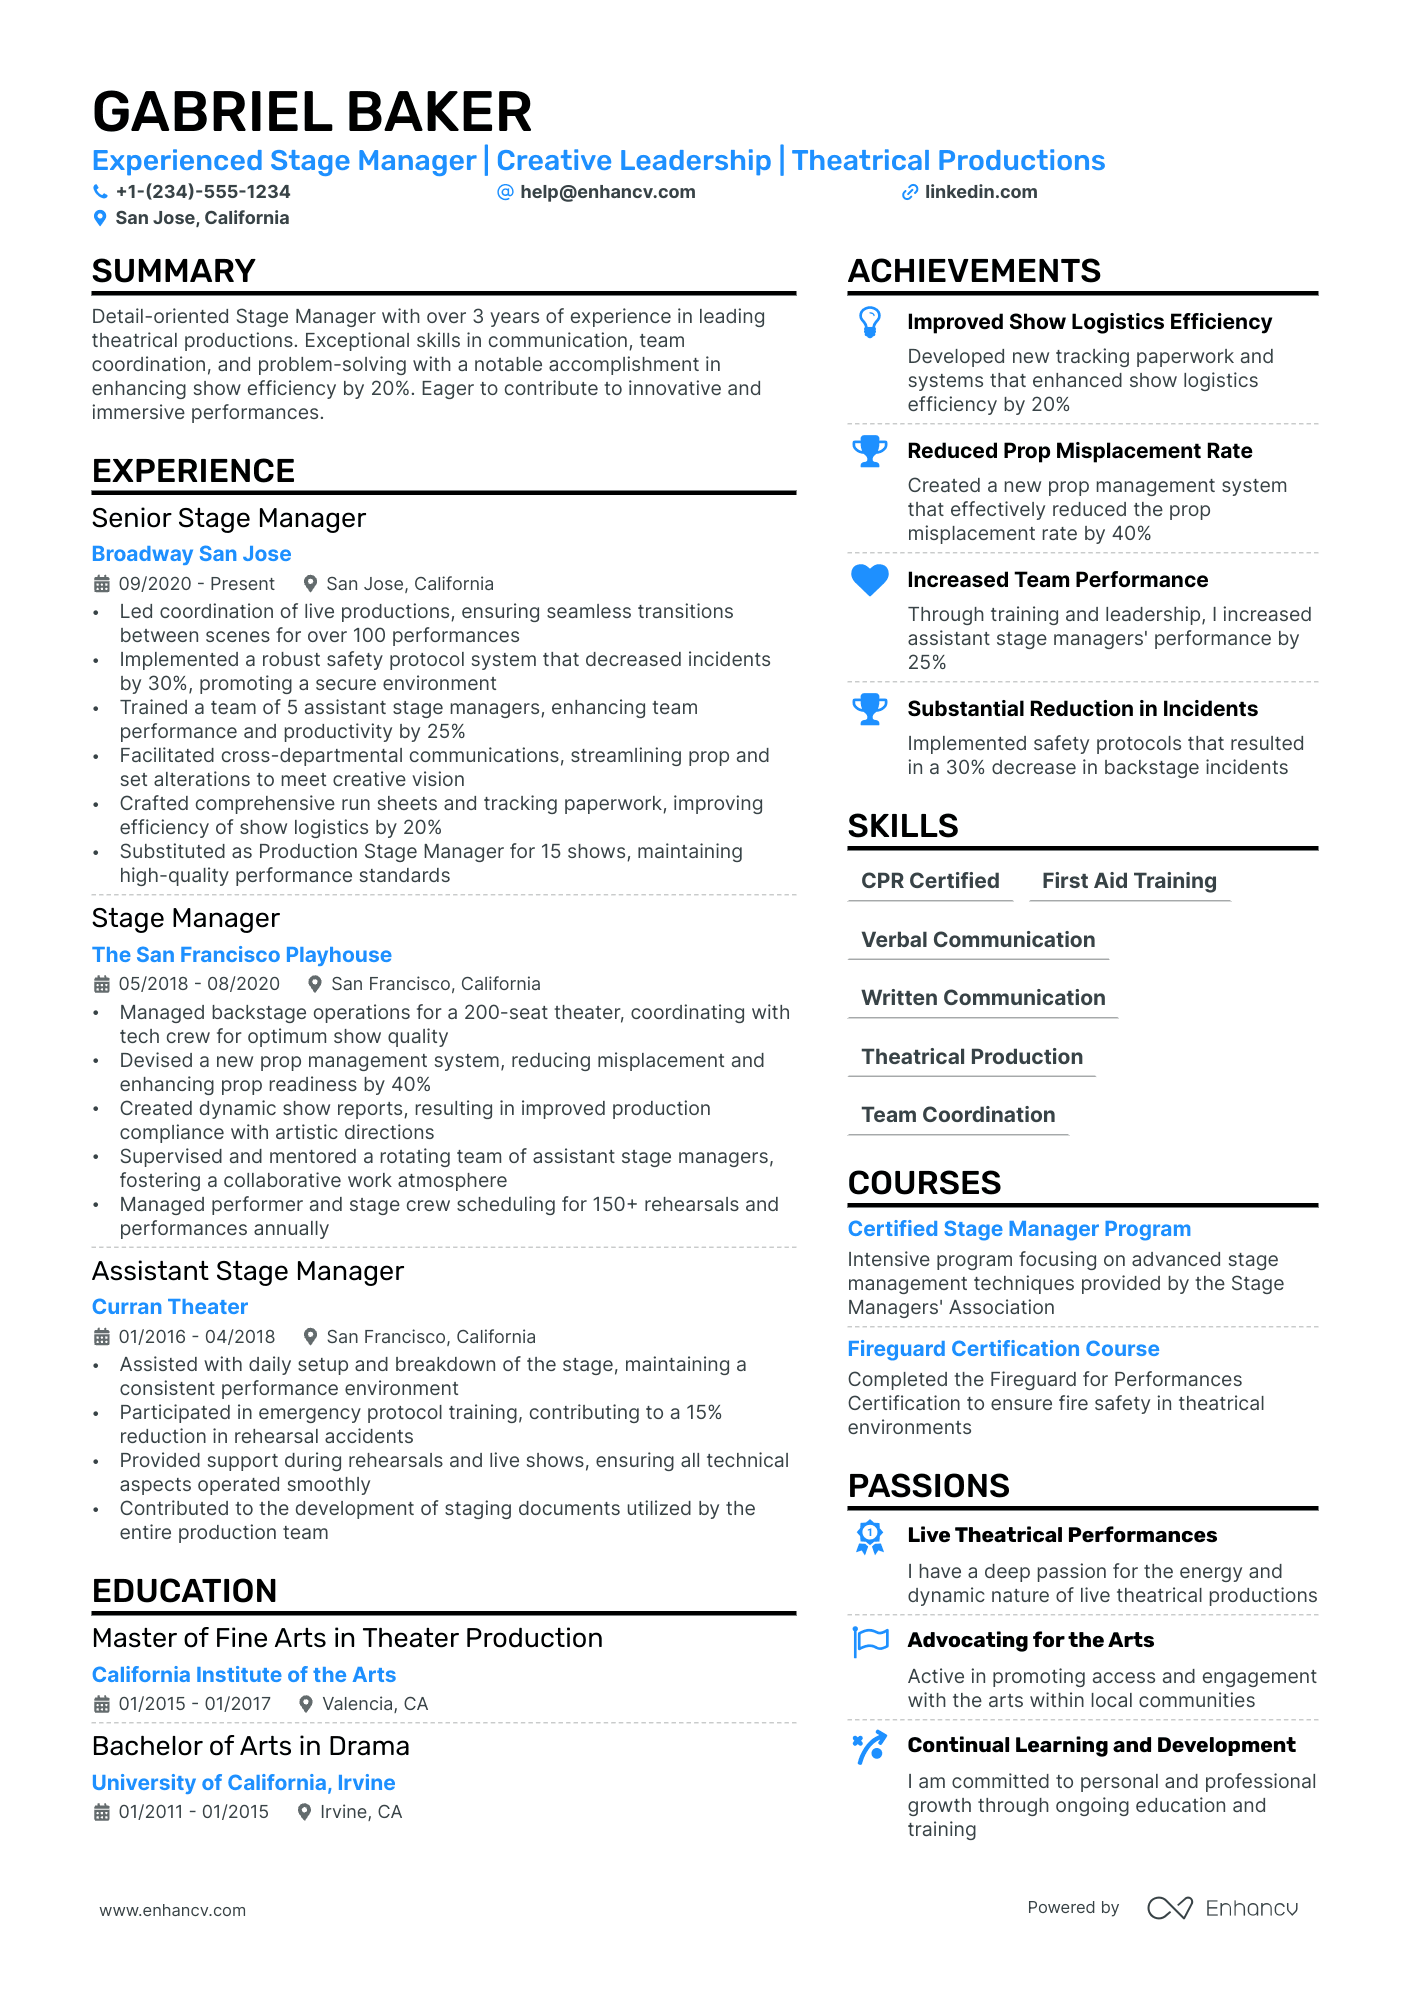 Stage Manager resume example